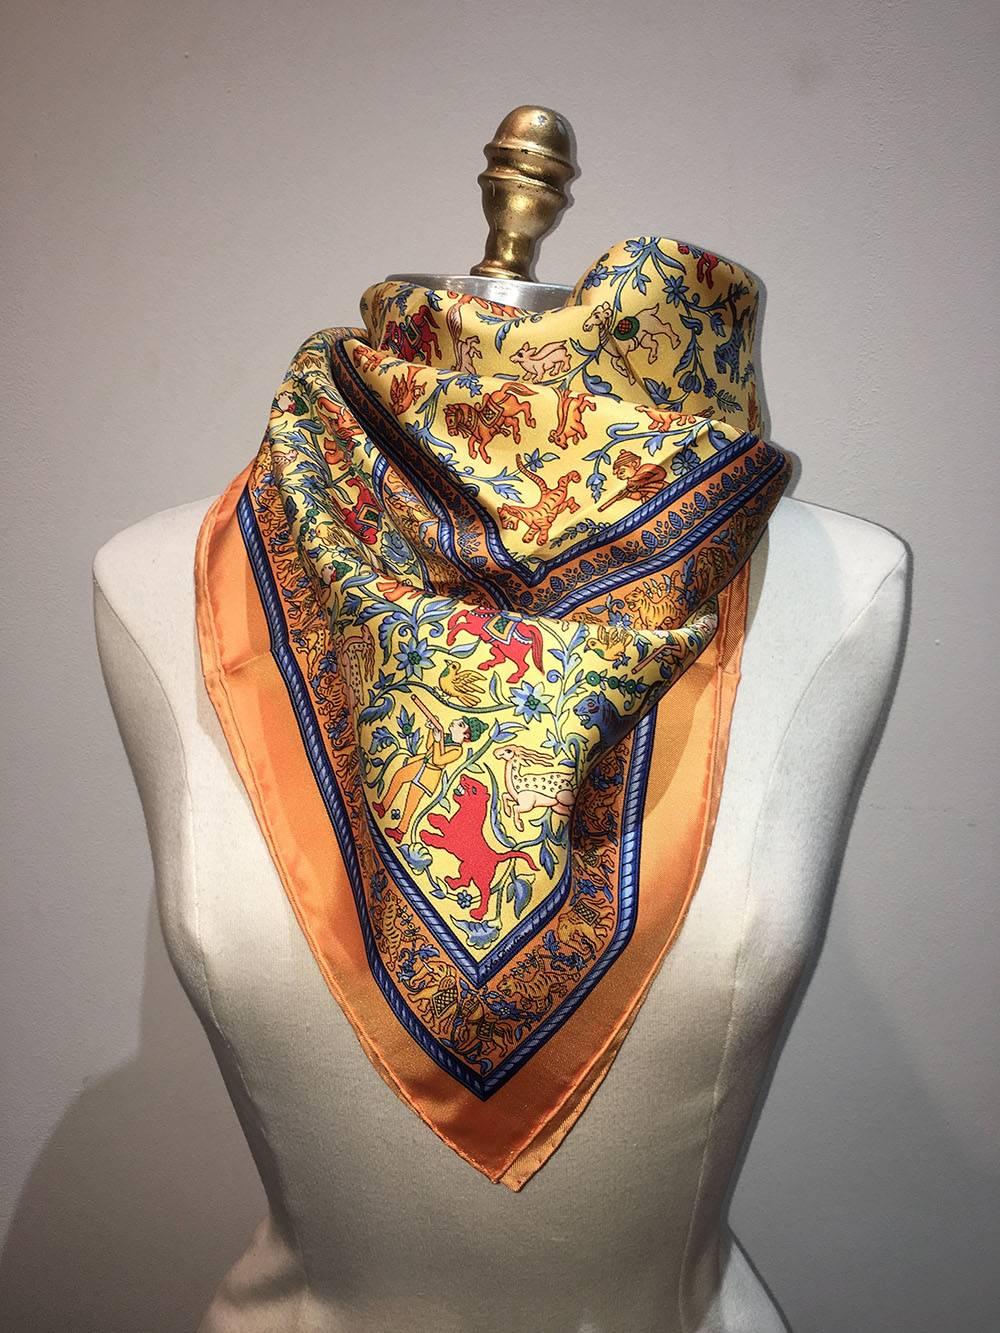 FABULOUS Hermes Vintage Chasse en Inde Silk Scarf in Orange in excellent condition. Original silk screen design c1986 by Michel Duchene features an intricate design depicting hunting in India over a yellow and orange background and border. 100%